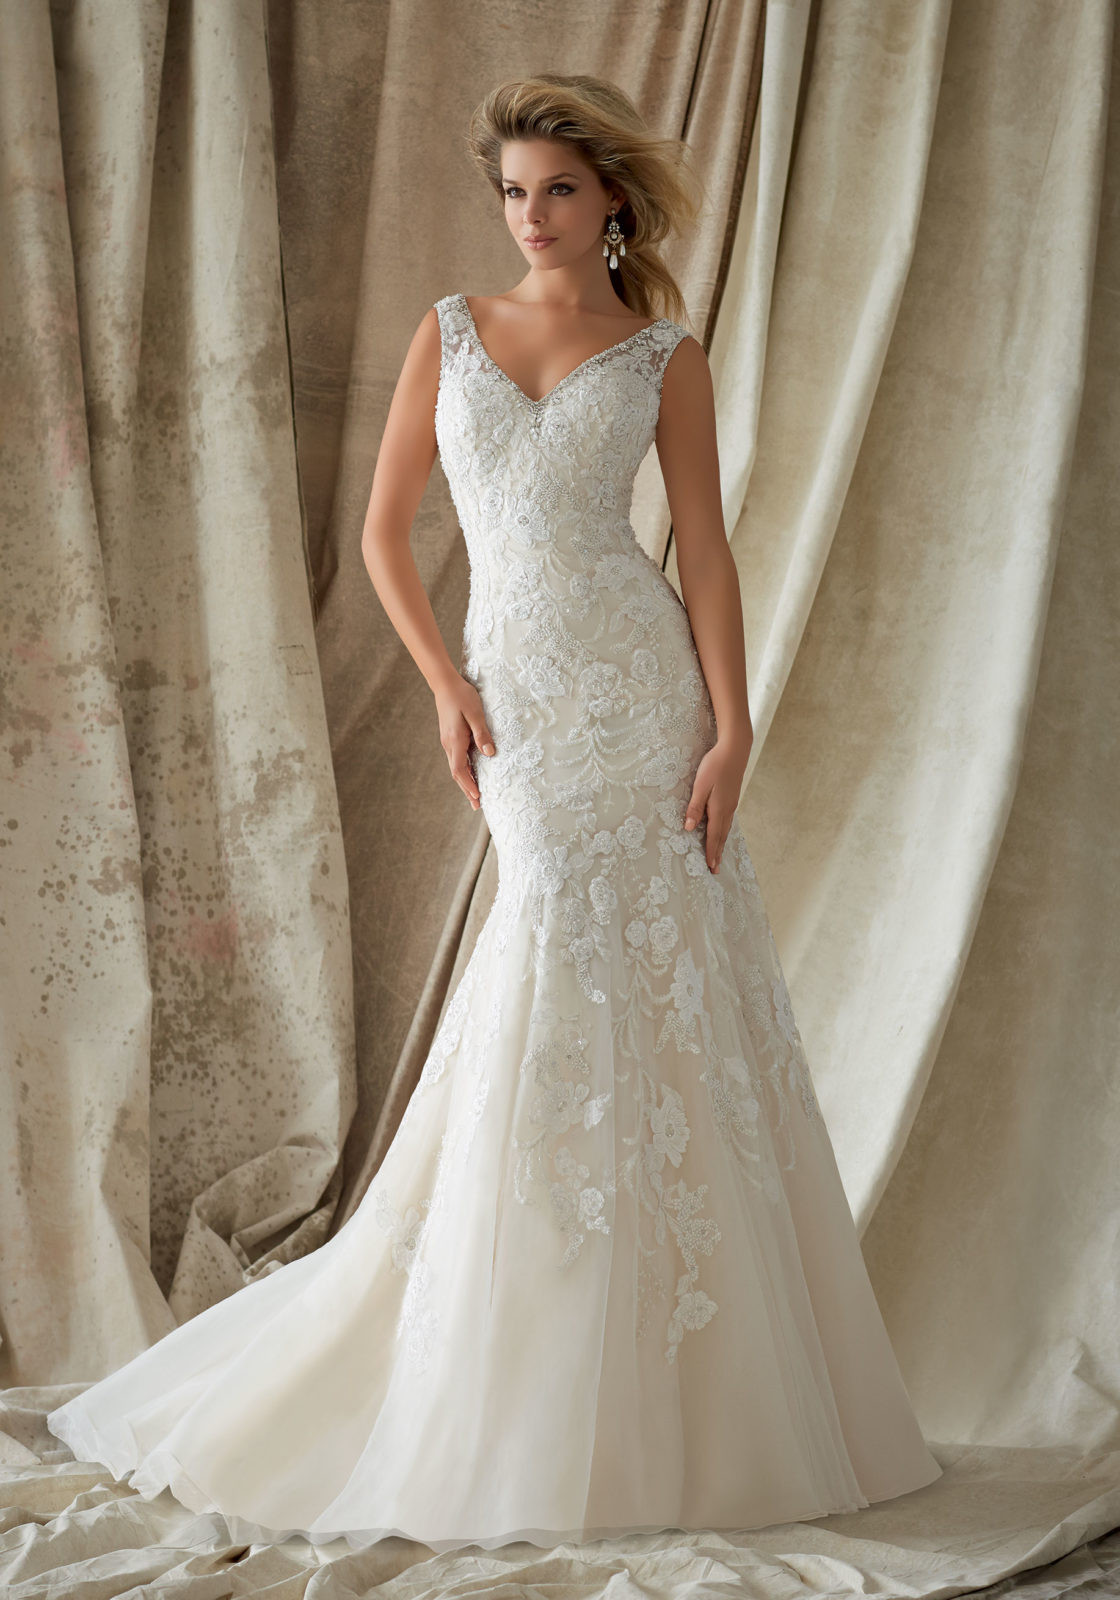 Beaded Wedding Dresses
 Crystal Beaded Embroidery with Lace on Net Bridal Gown